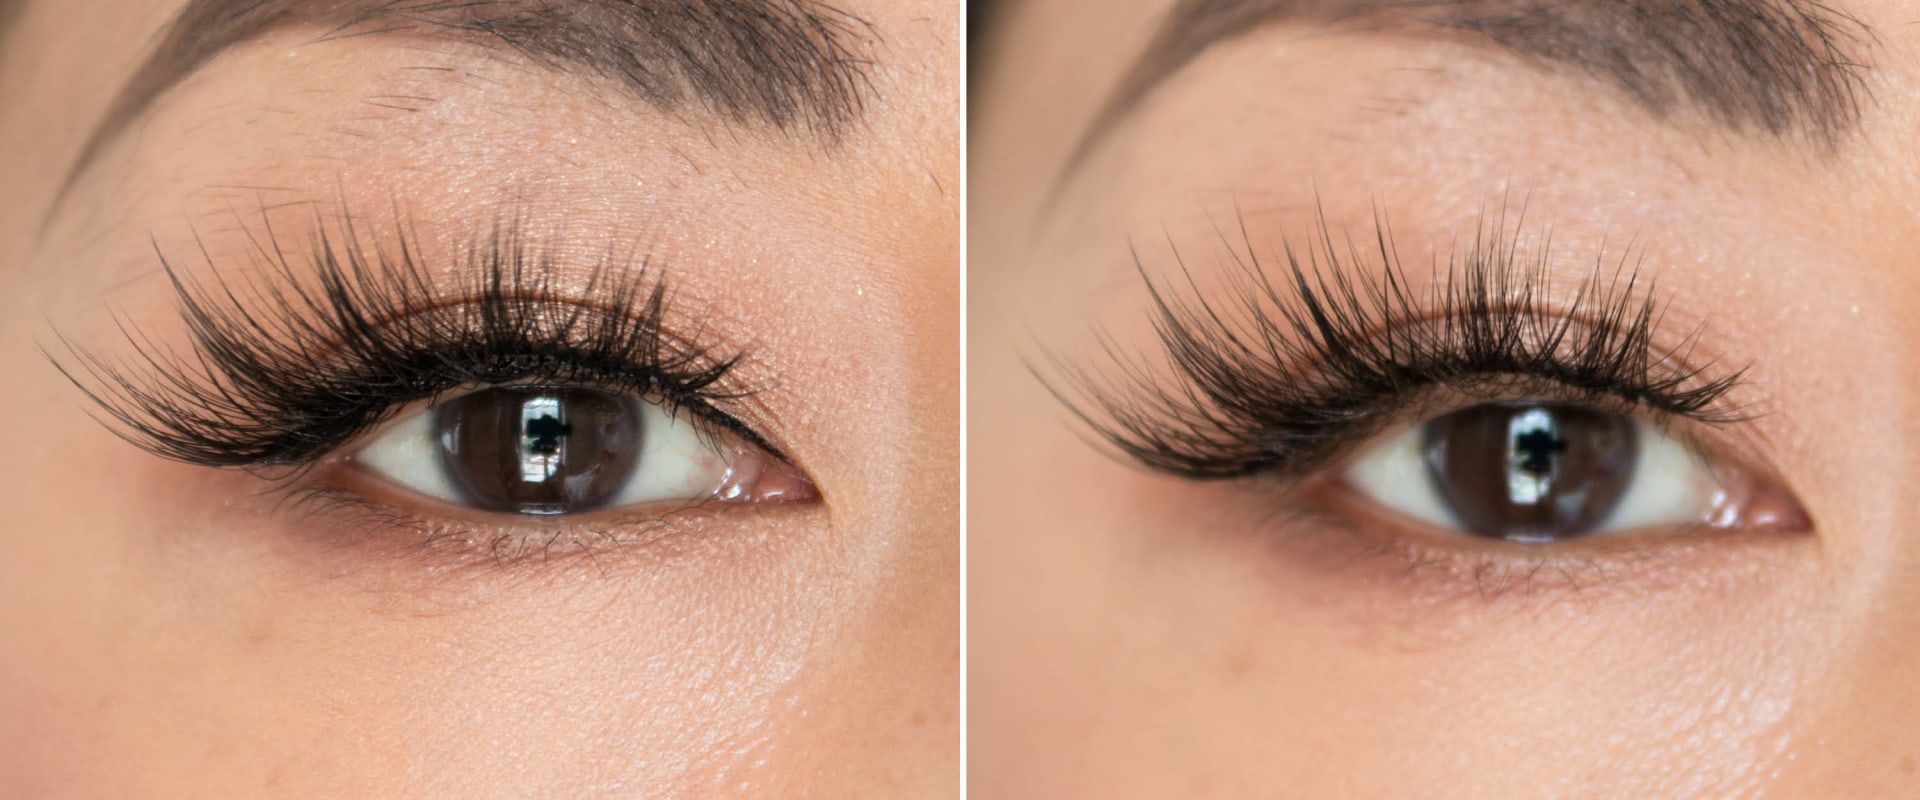 Are fake eyelashes supposed to be uncomfortable?